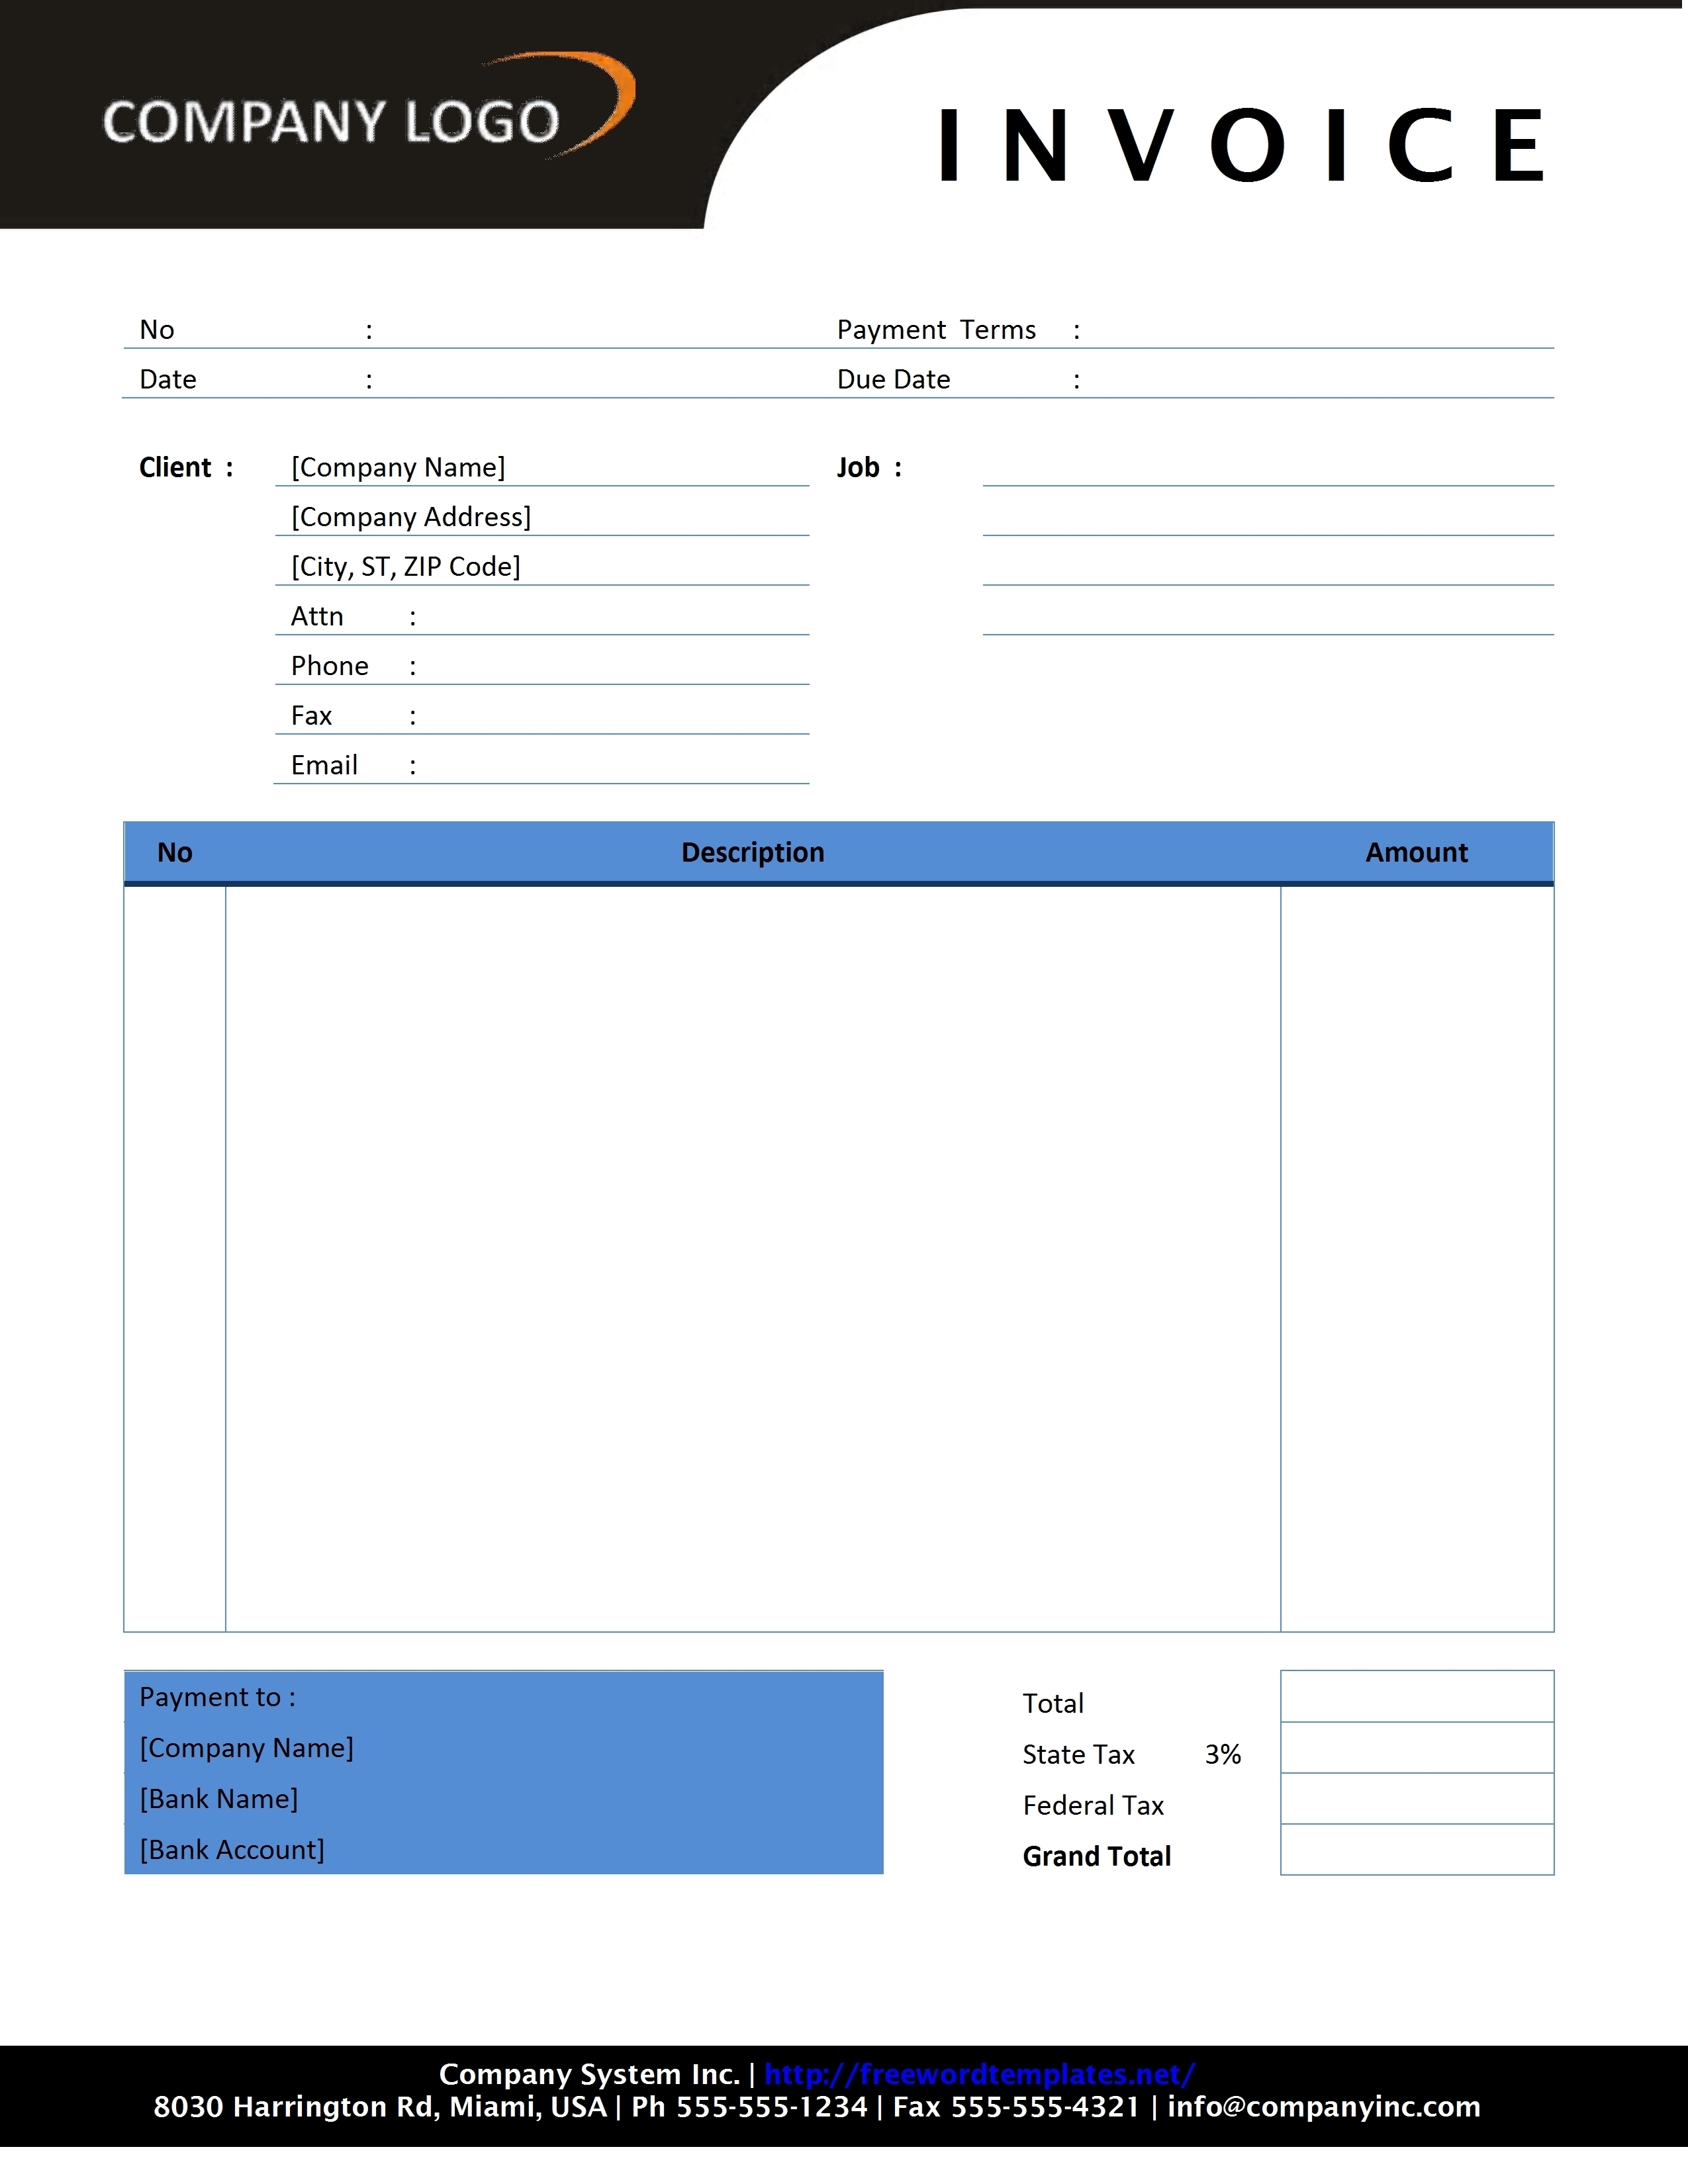 how to get an invoice template on word